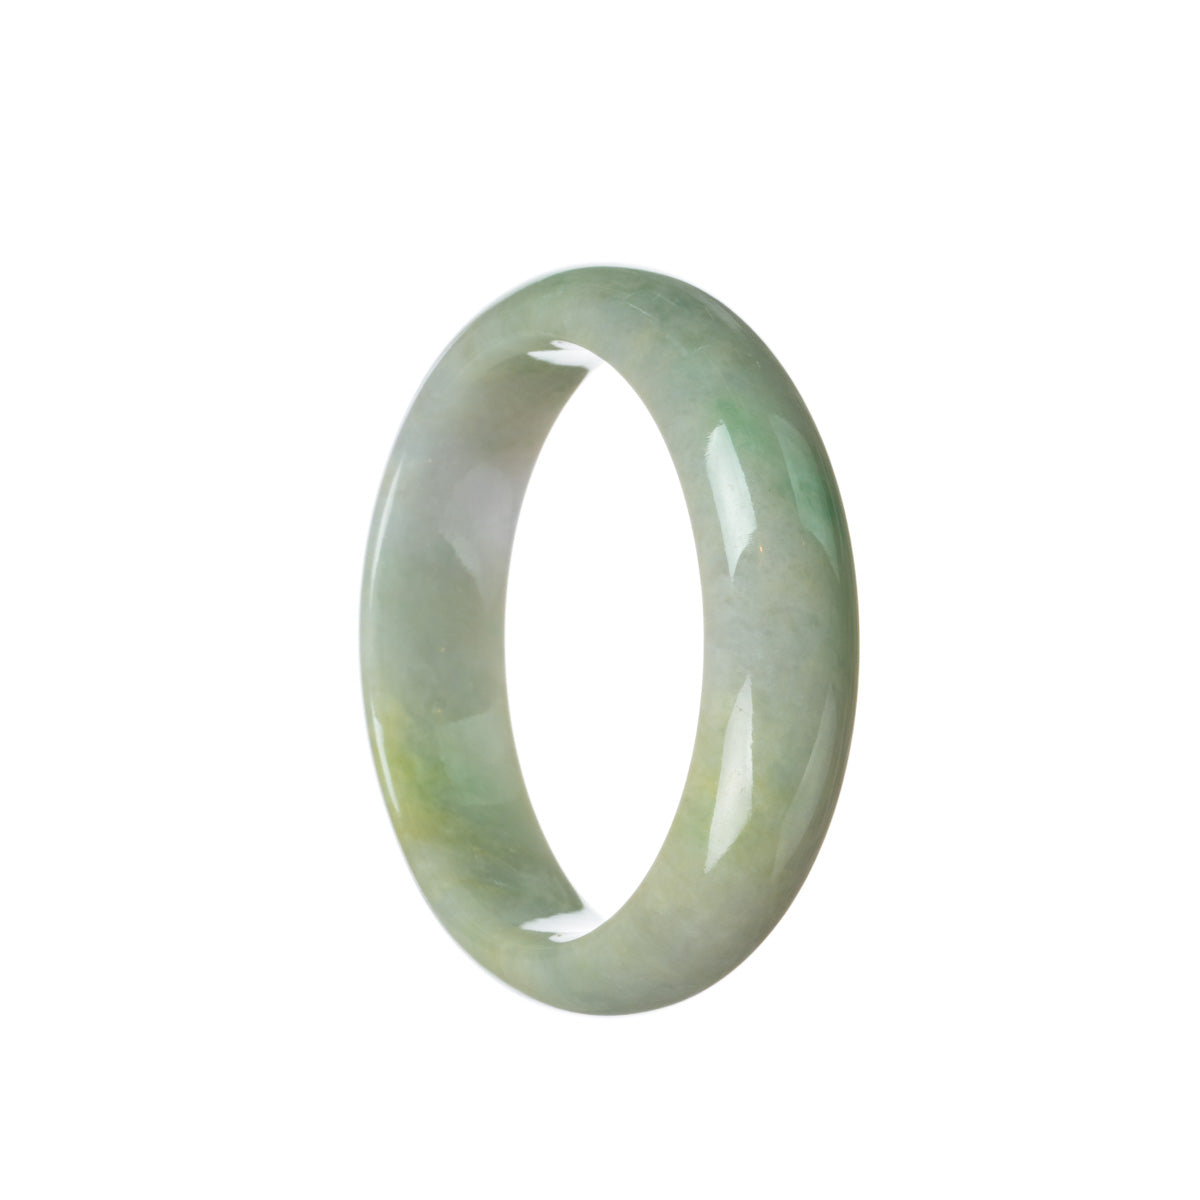 A half-moon shaped jade bracelet in a soothing green color with hints of lavender.